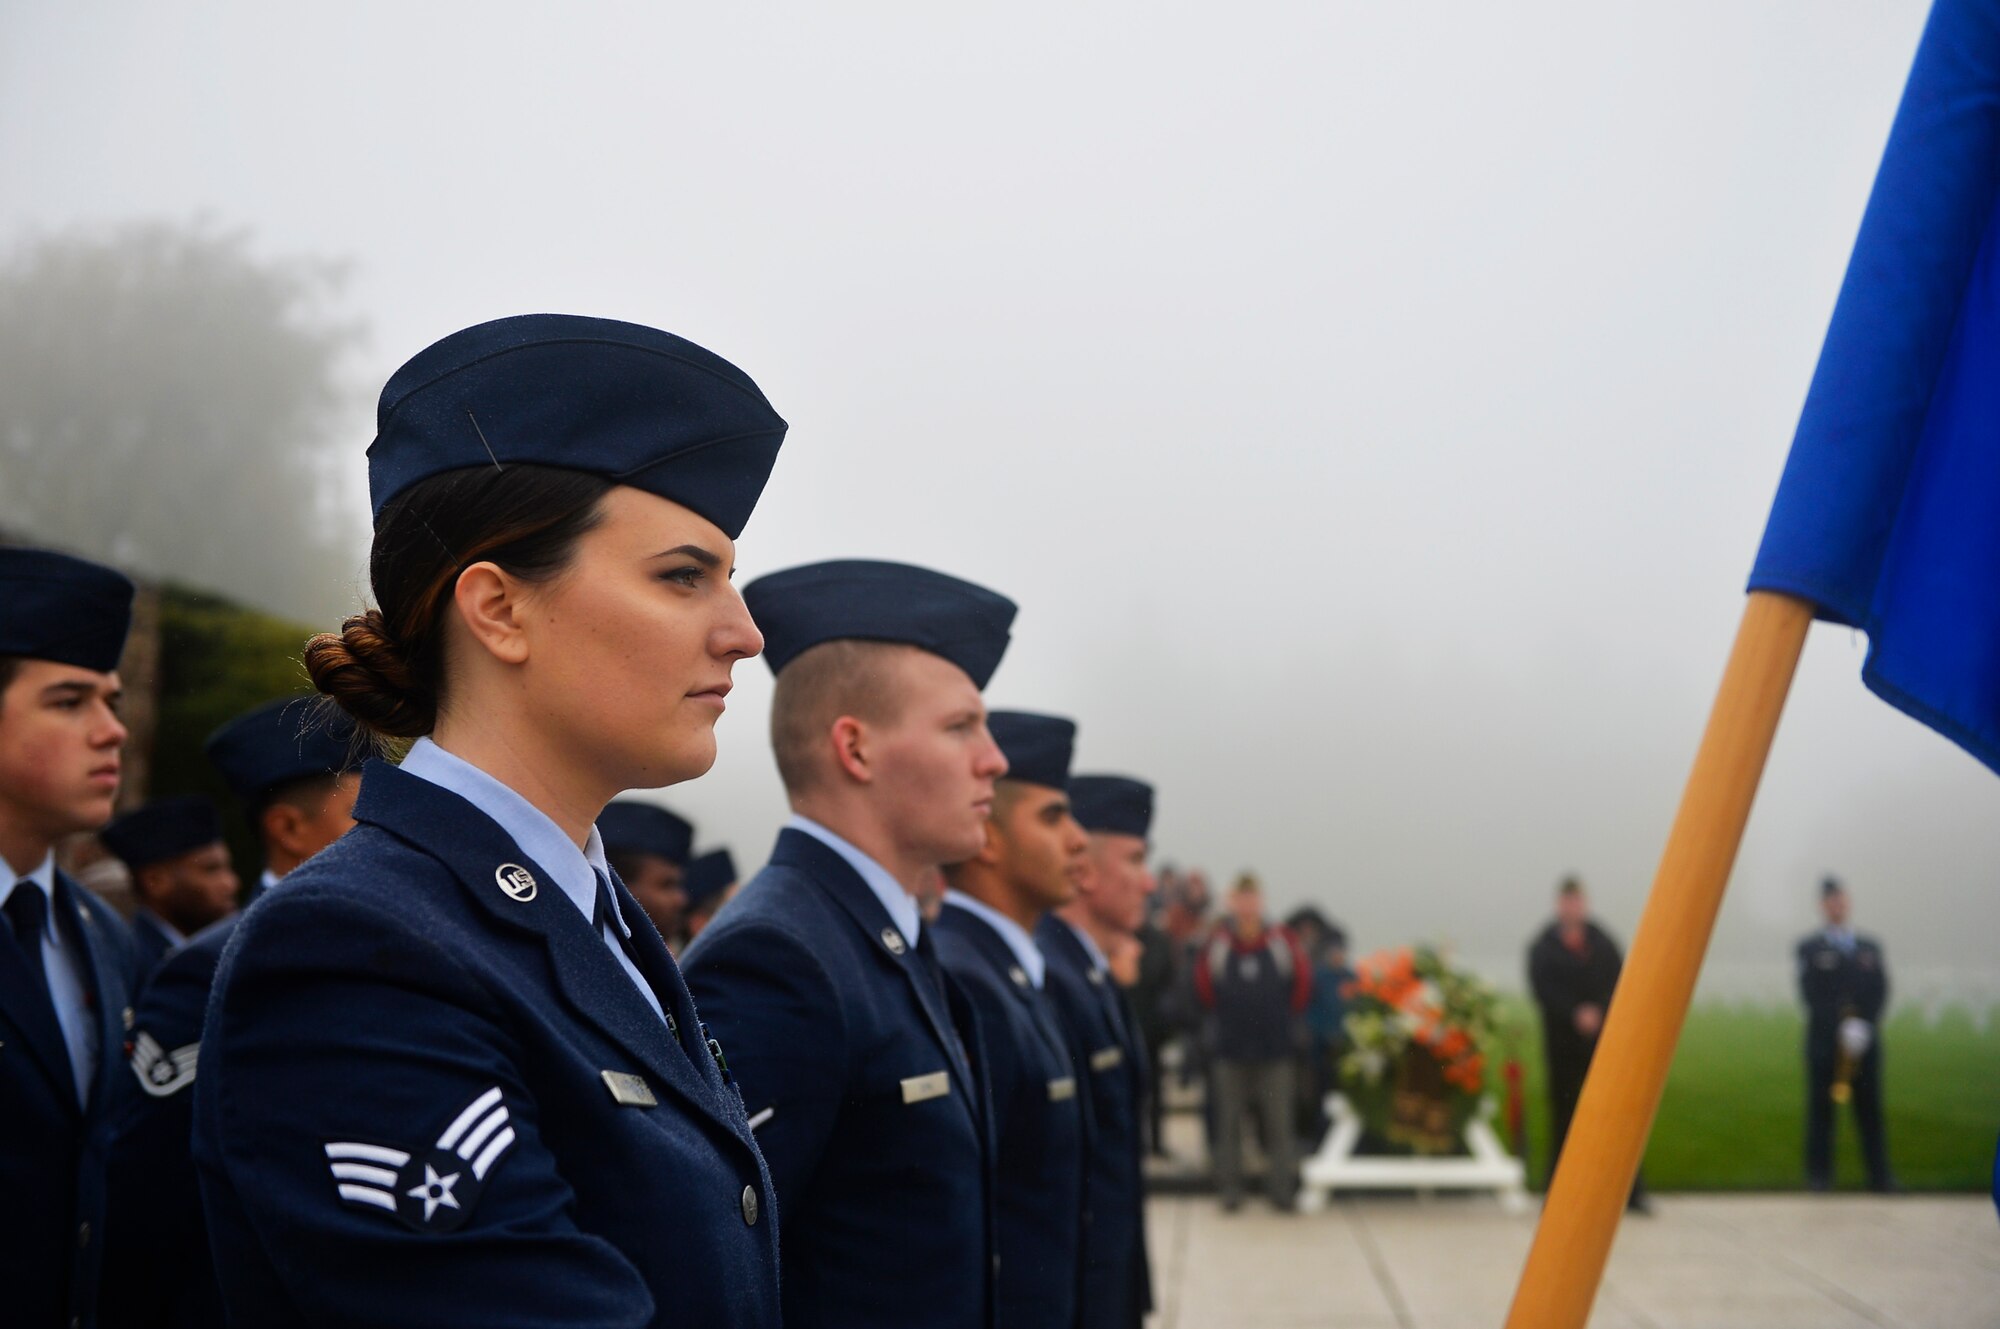 U.S. Air Force Airmen assigned to the 86th Civil Engineer Group stand in formation during a Veterans Day Ceremony at Henri-Chapelle American Cemetery and Memorial, Belgium, Nov. 11, 2017. The ceremony included speeches, a wreath-laying presentation, a hereditary nine gun salute, and a playing of the Belgian and American national anthems. (U.S. Air Force photo by Airman 1st Class Joshua Magbanua)